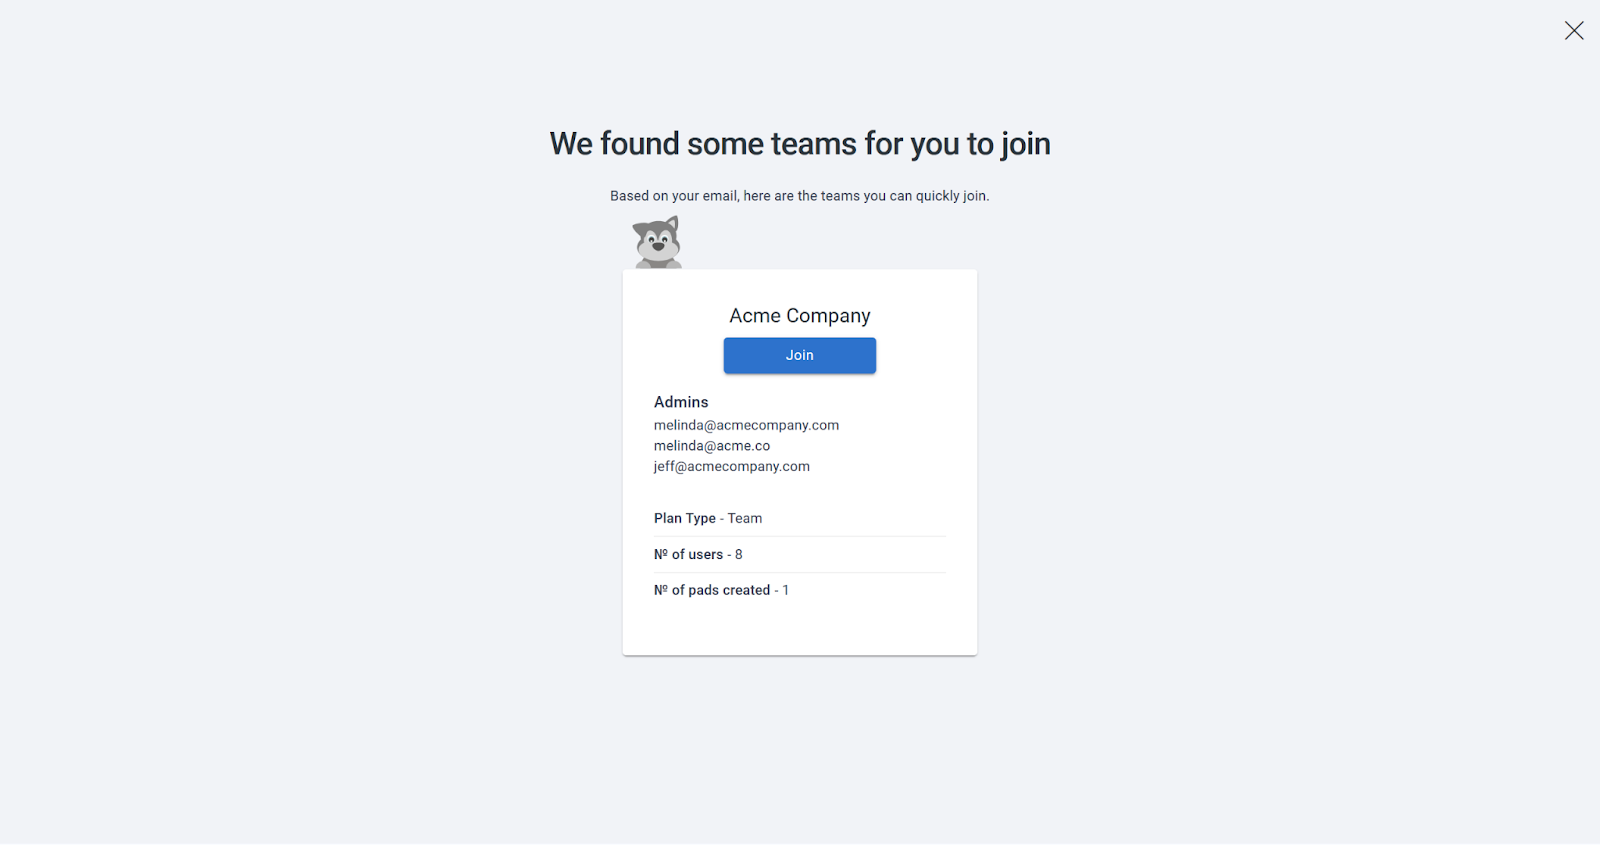 The initial team invitation page with the text "we found some teams for you to join" at the top. Below is a list of admins, the plan type, number of users, and number of pads created. 